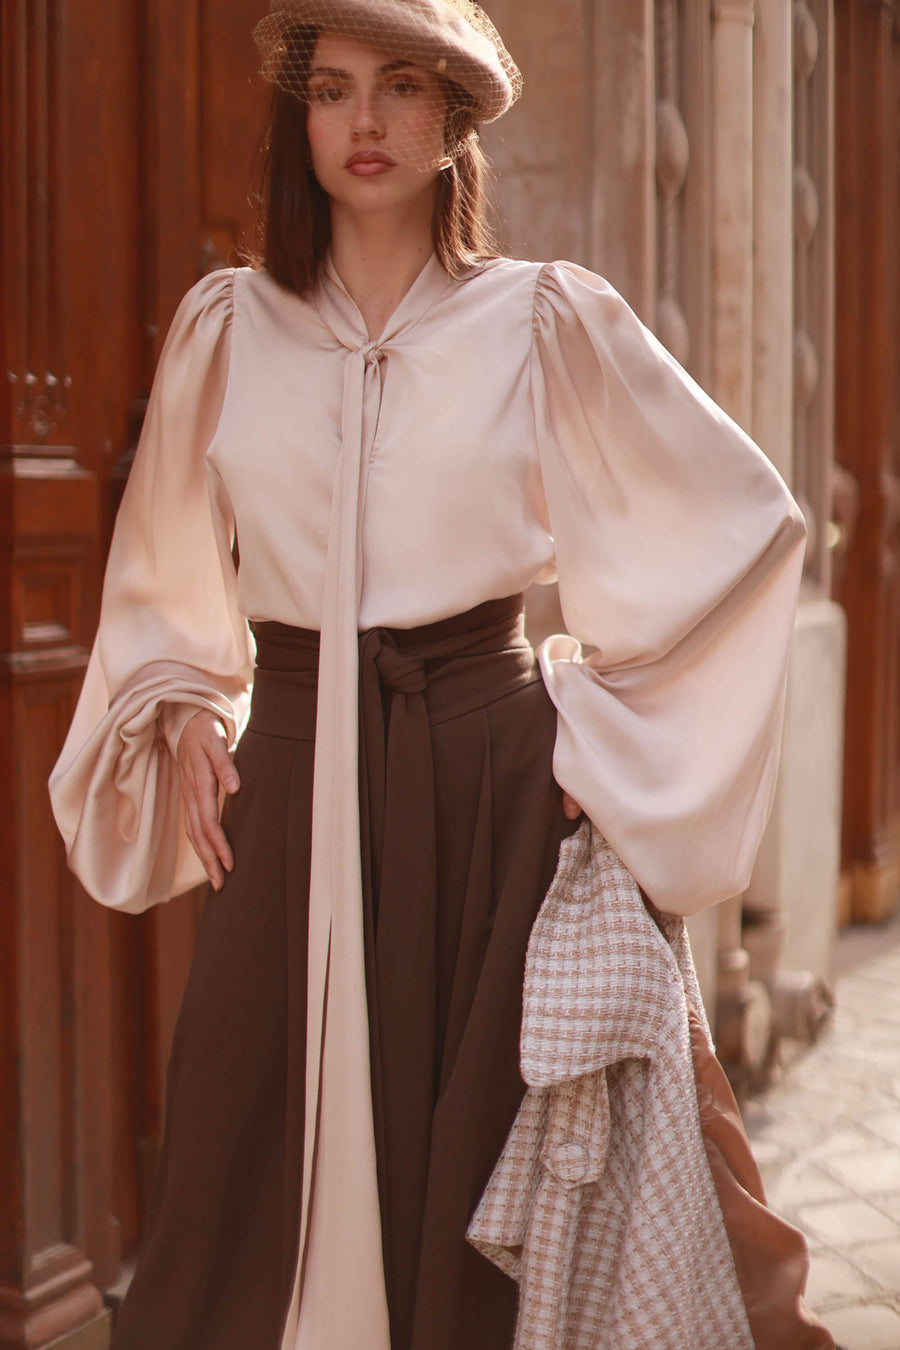 Brown Tailored Wrap Trousers